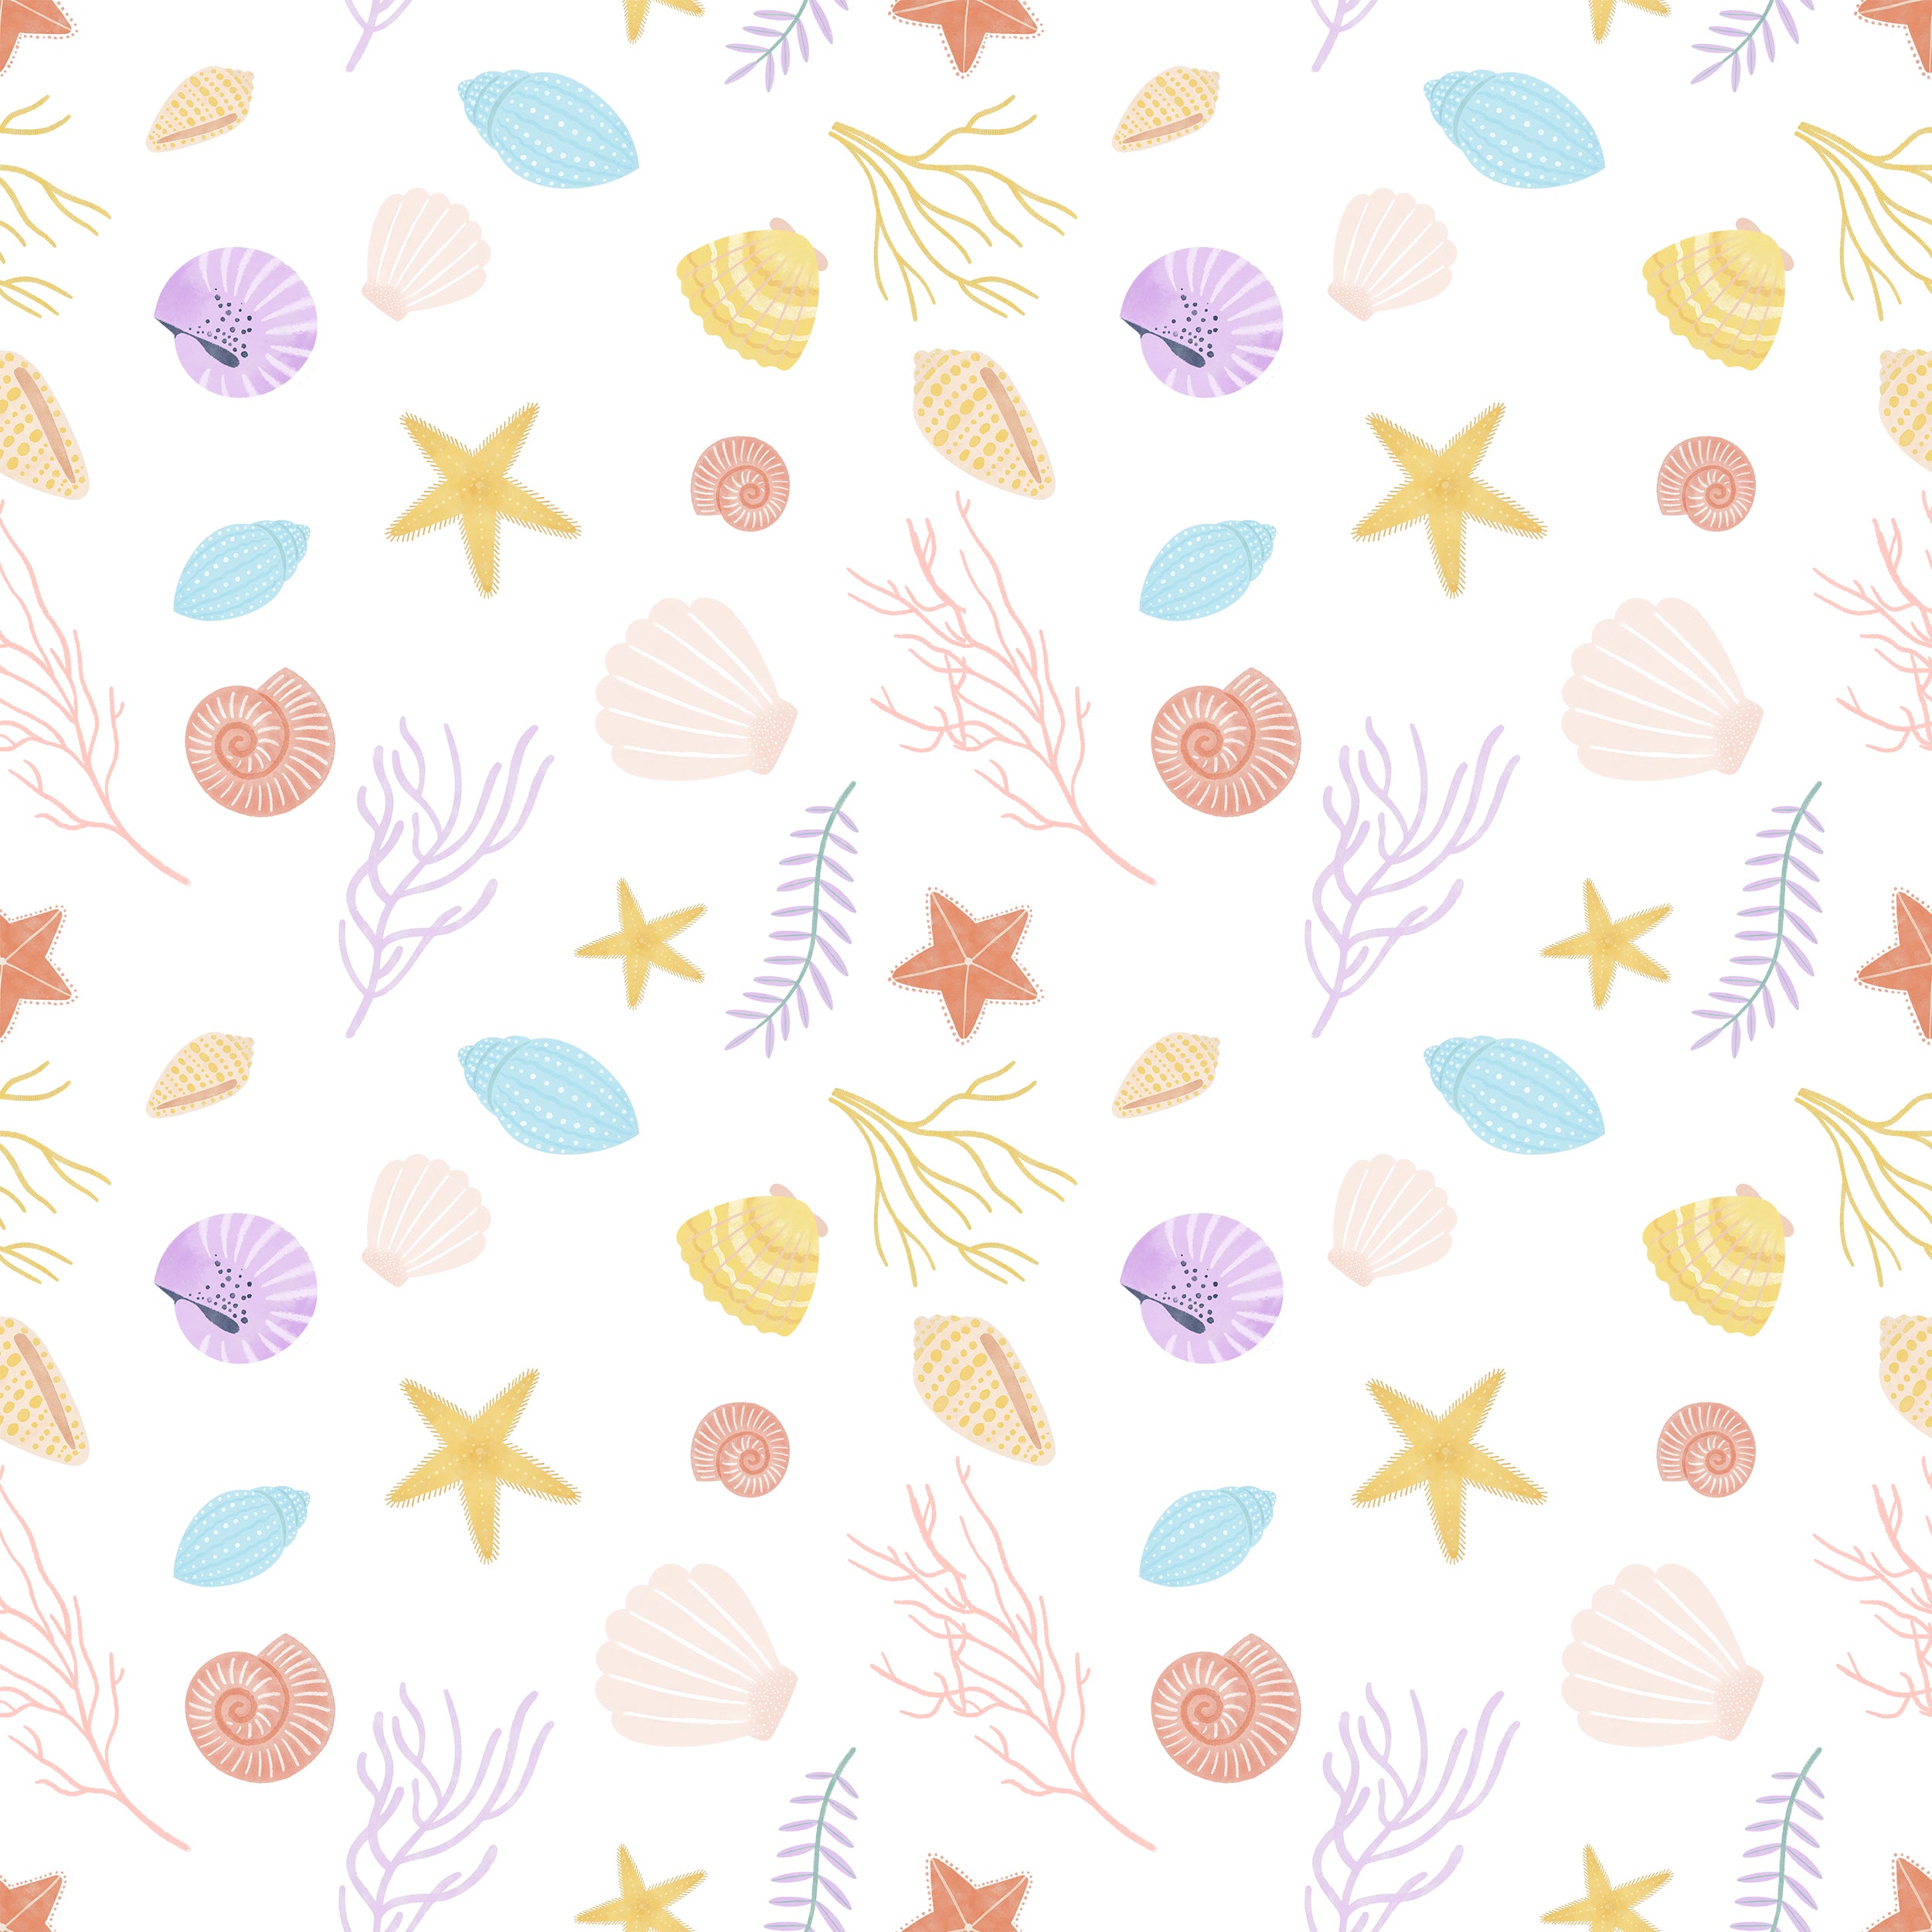 A close-up view of the Colourful Sea Wallpaper, displaying a dense and colorful pattern of underwater sea life including shells, starfish, and coral in soft pastel hues on a white background